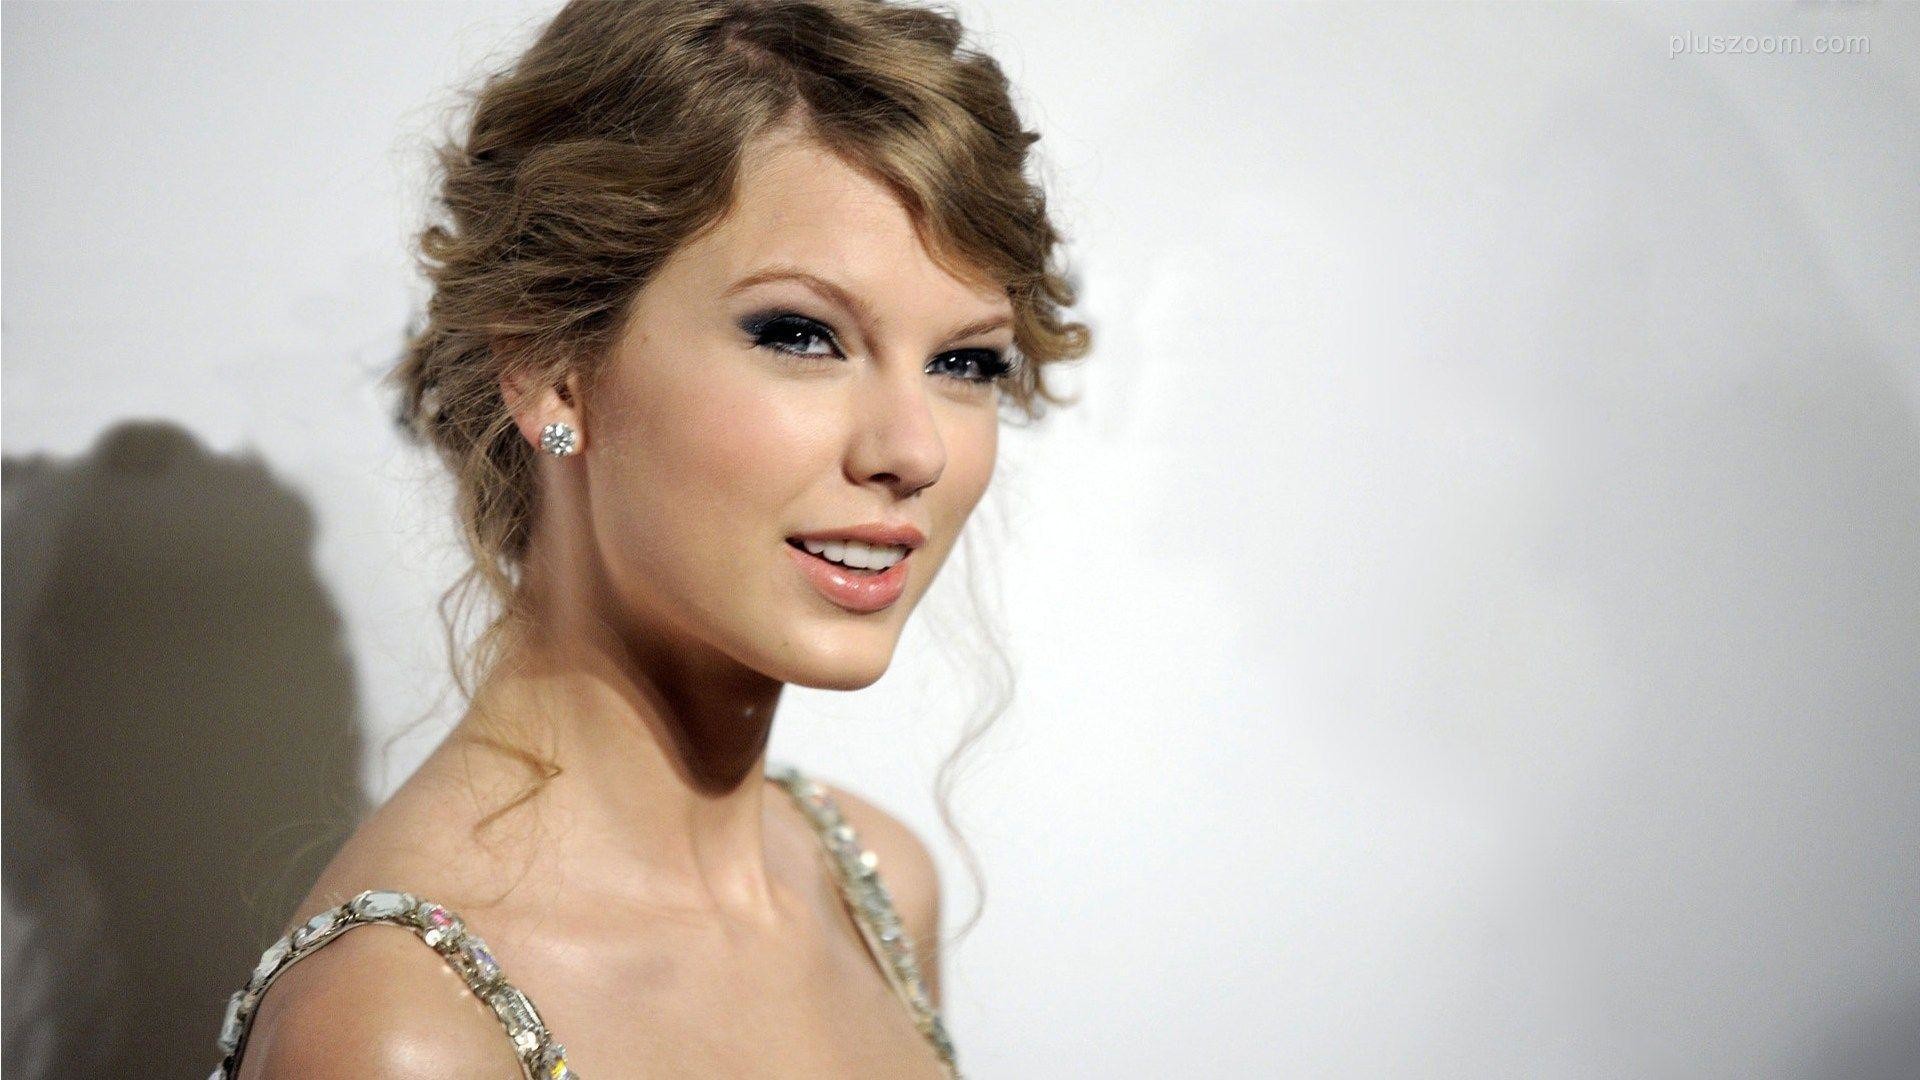 1920x1080 Taylor Swift HD Desktop Wallpapers for Free Download - PlusZoom